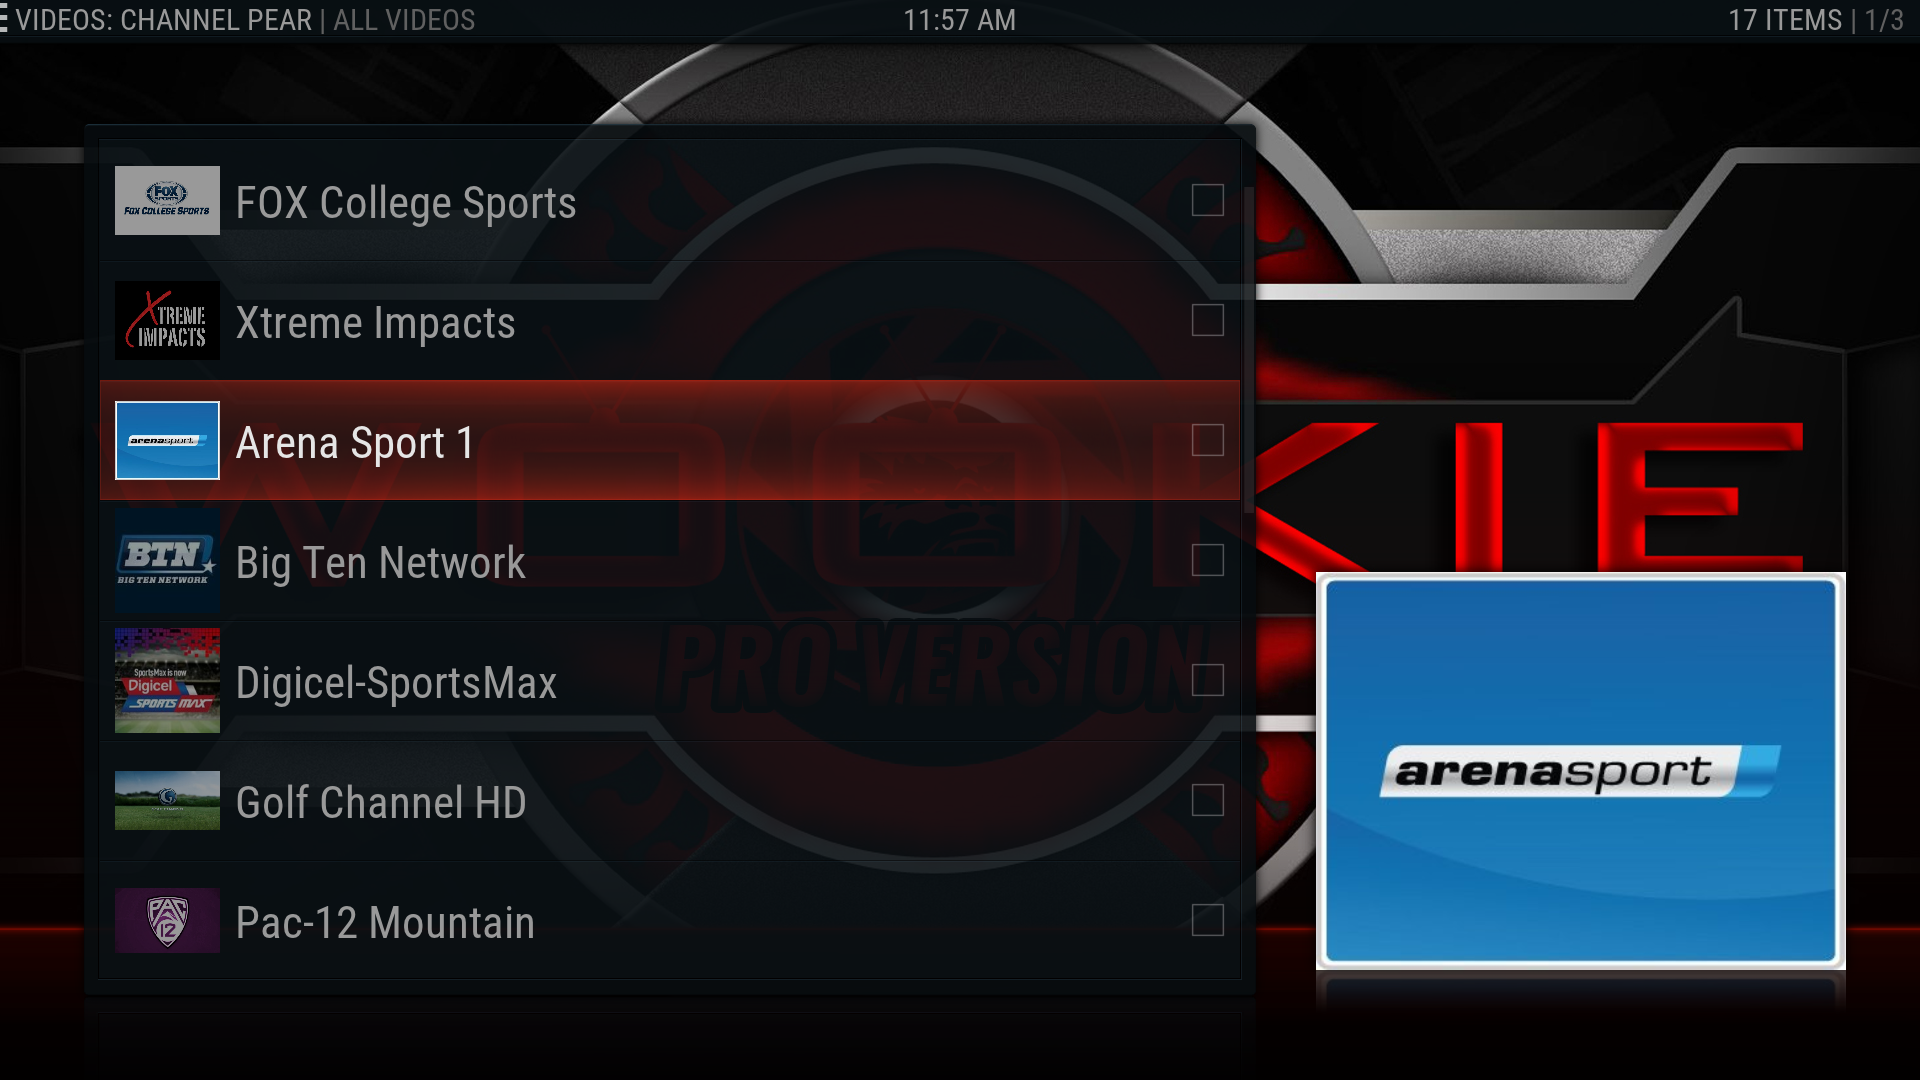 How to Install Channel Pear IPTV AddOn for Kodi